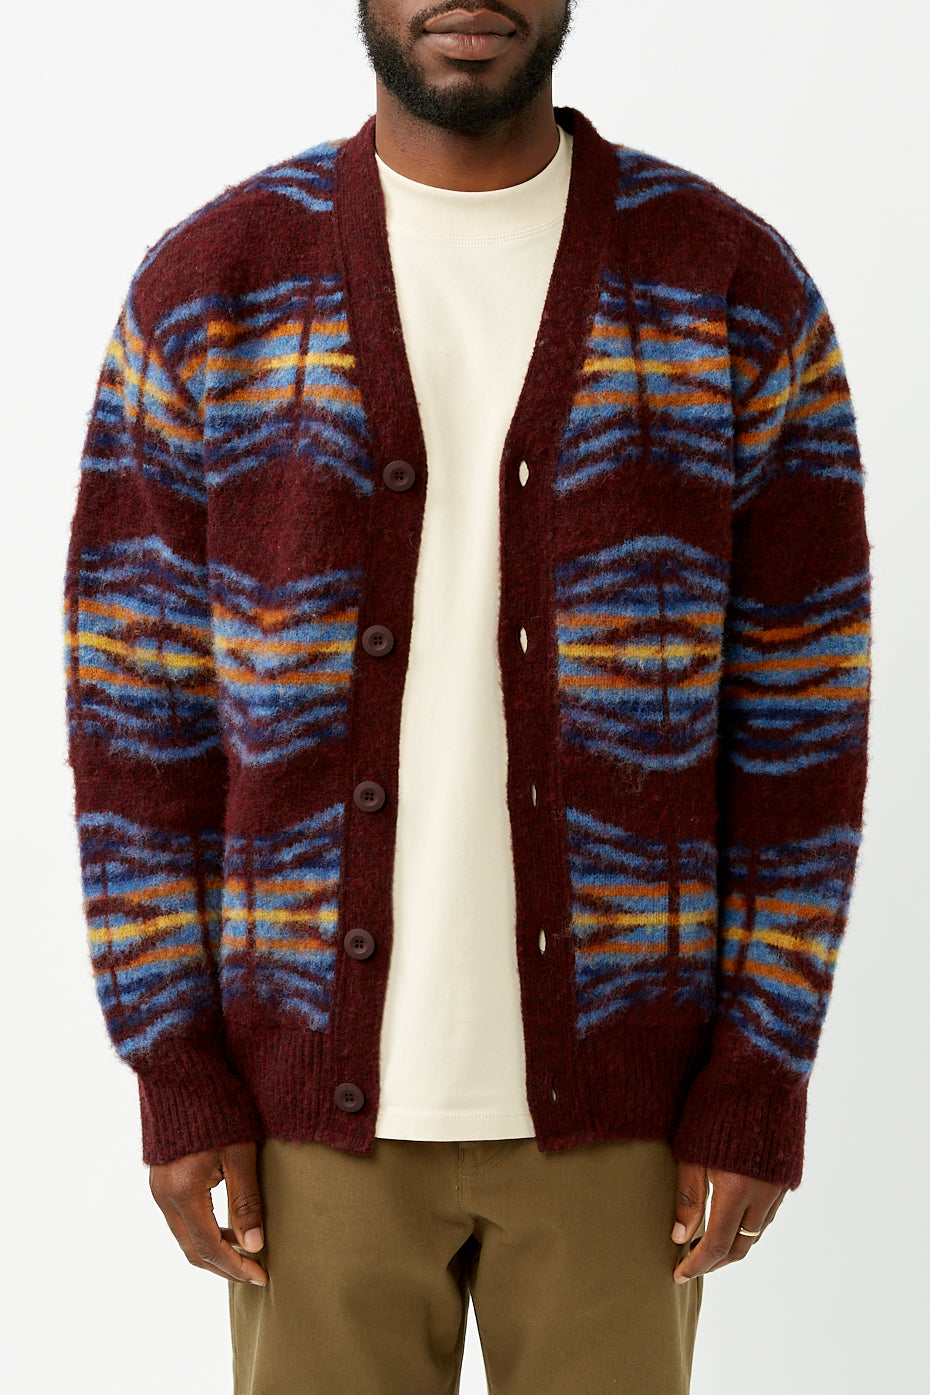 Howlin' Bordeaux Out Of This World Knit Cardigan